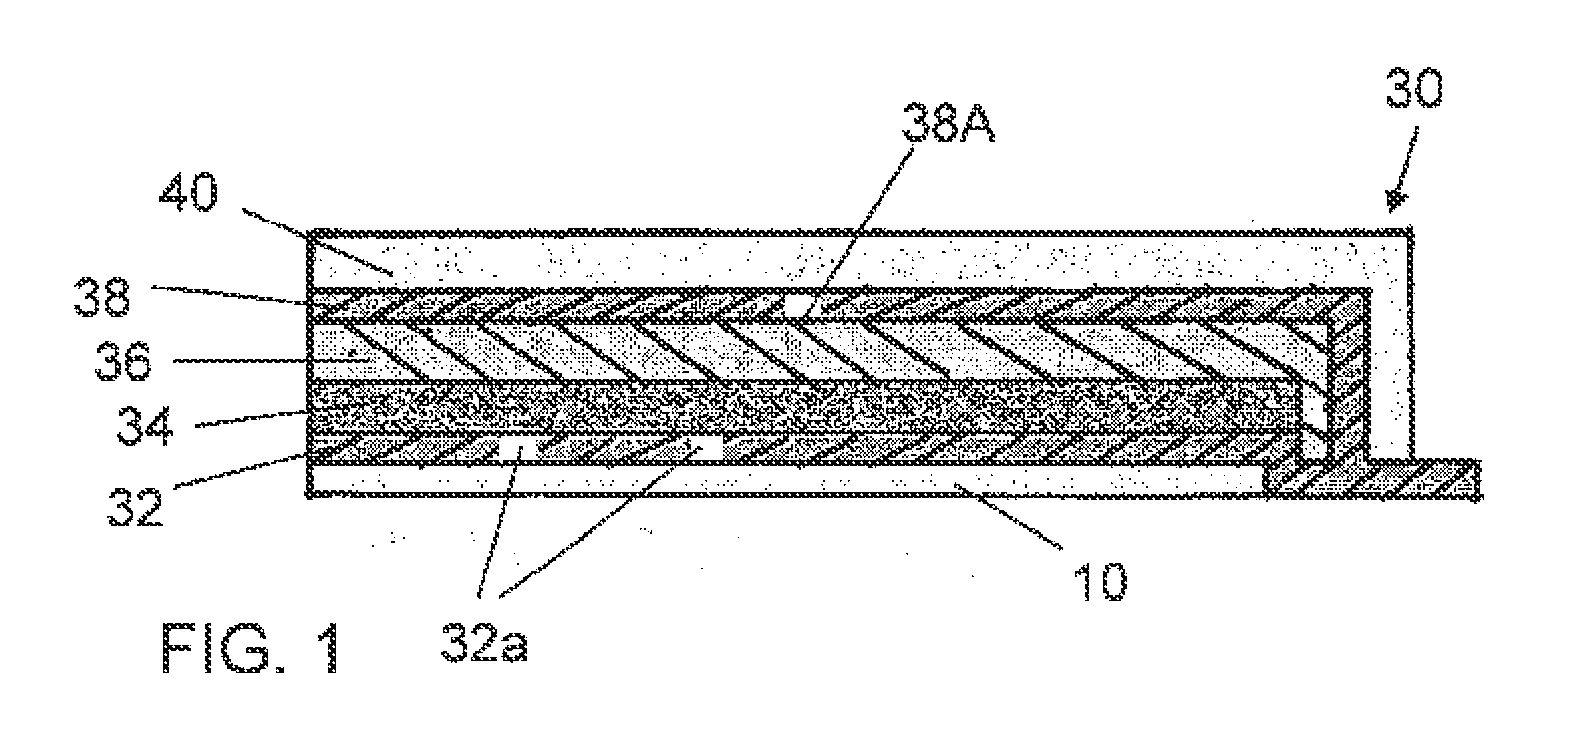 Radiation curable composition for water scavenging layer, and method of manufacturing the same